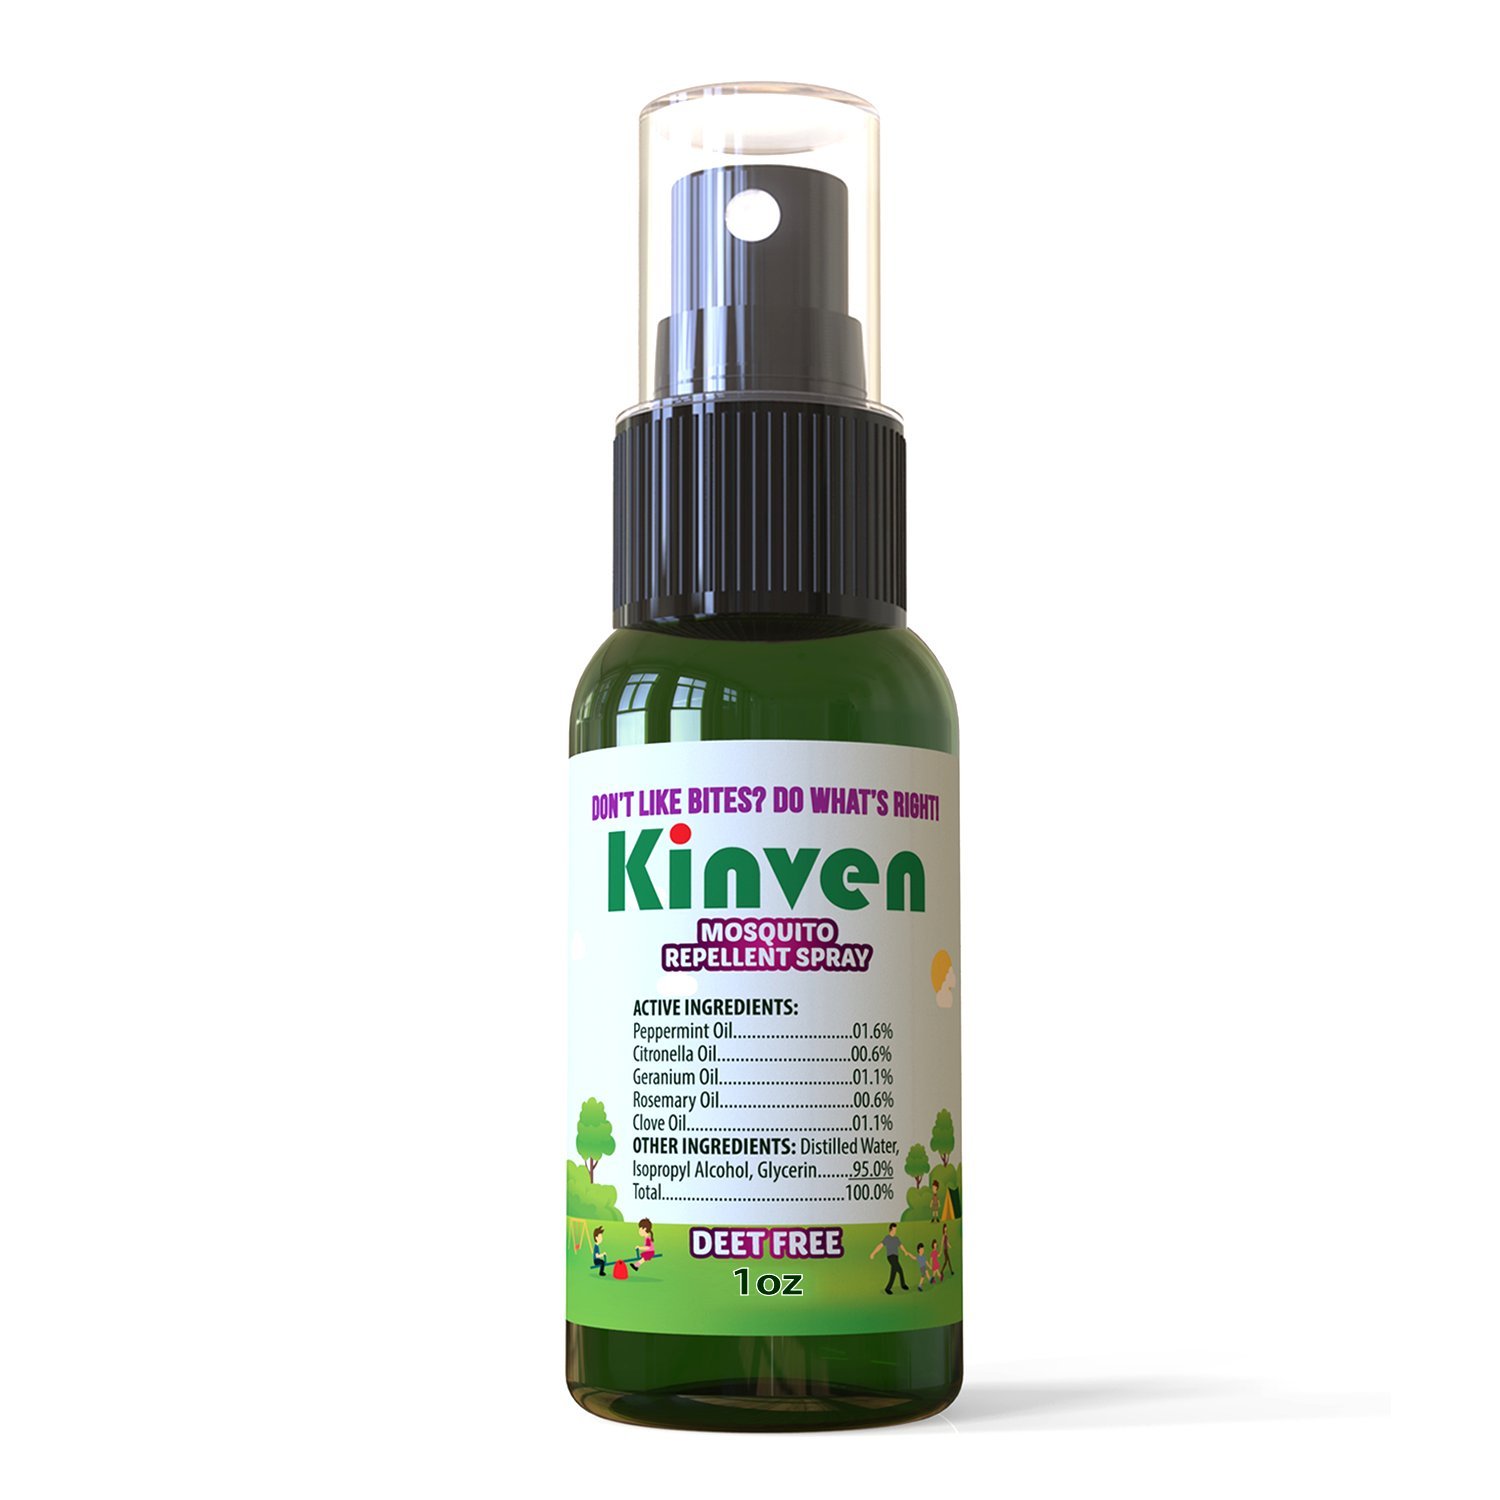 Kinven Mosquito Repellent Spray for Kids & Adults, Safe, Non-Toxic, DEET-Free, Long-Lasting Anti-Mosquito Bite Protection, with Natural Oils, 1oz - image 1 of 3